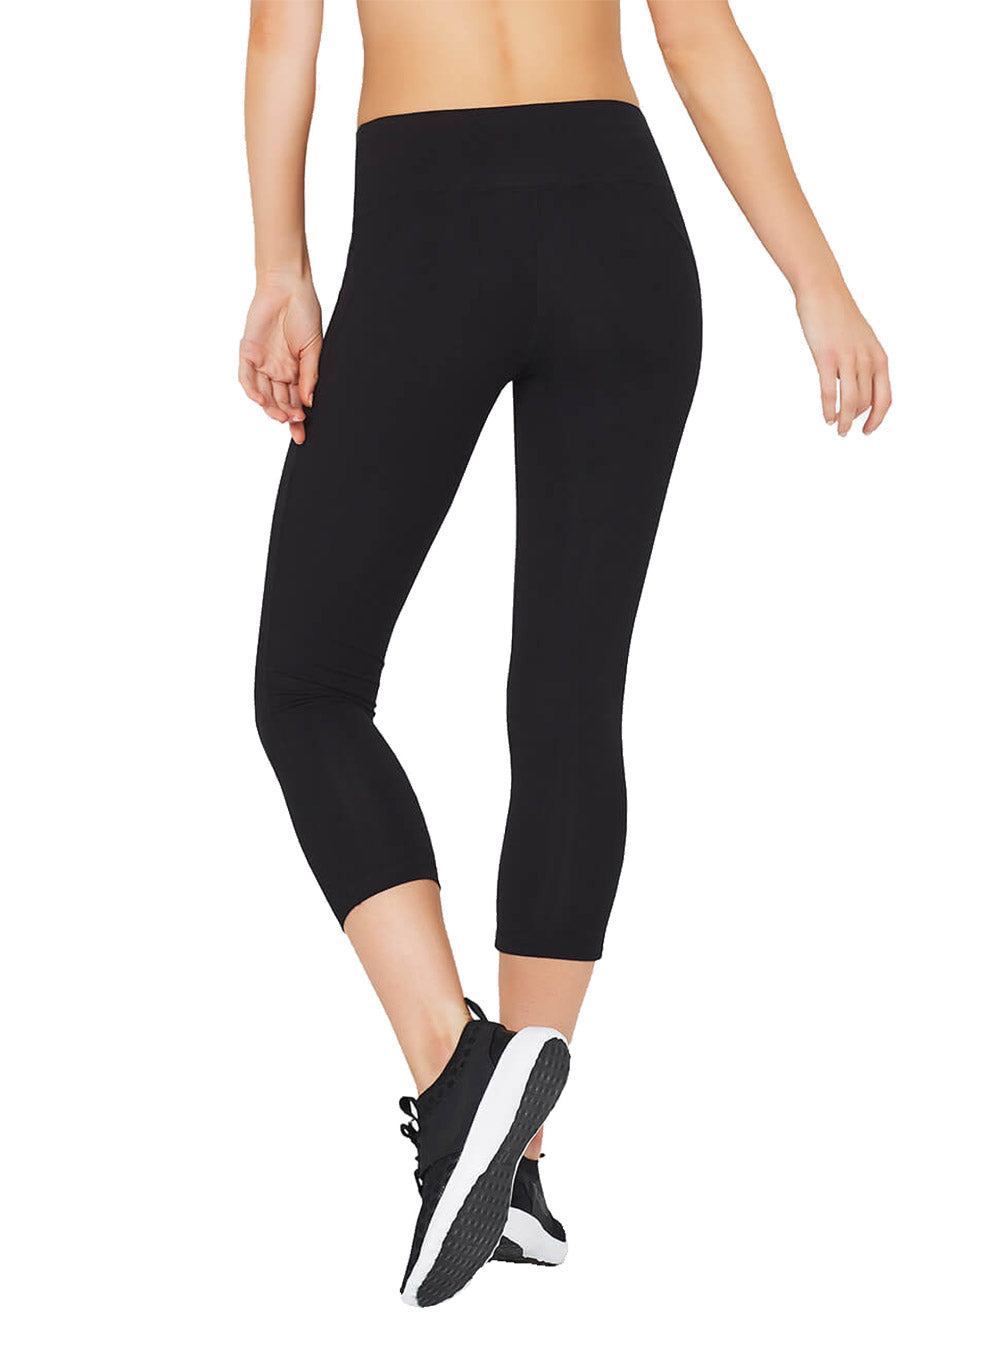 Boody Bamboo 3/4 Active Exercise Leggings Womens in Black Rear View